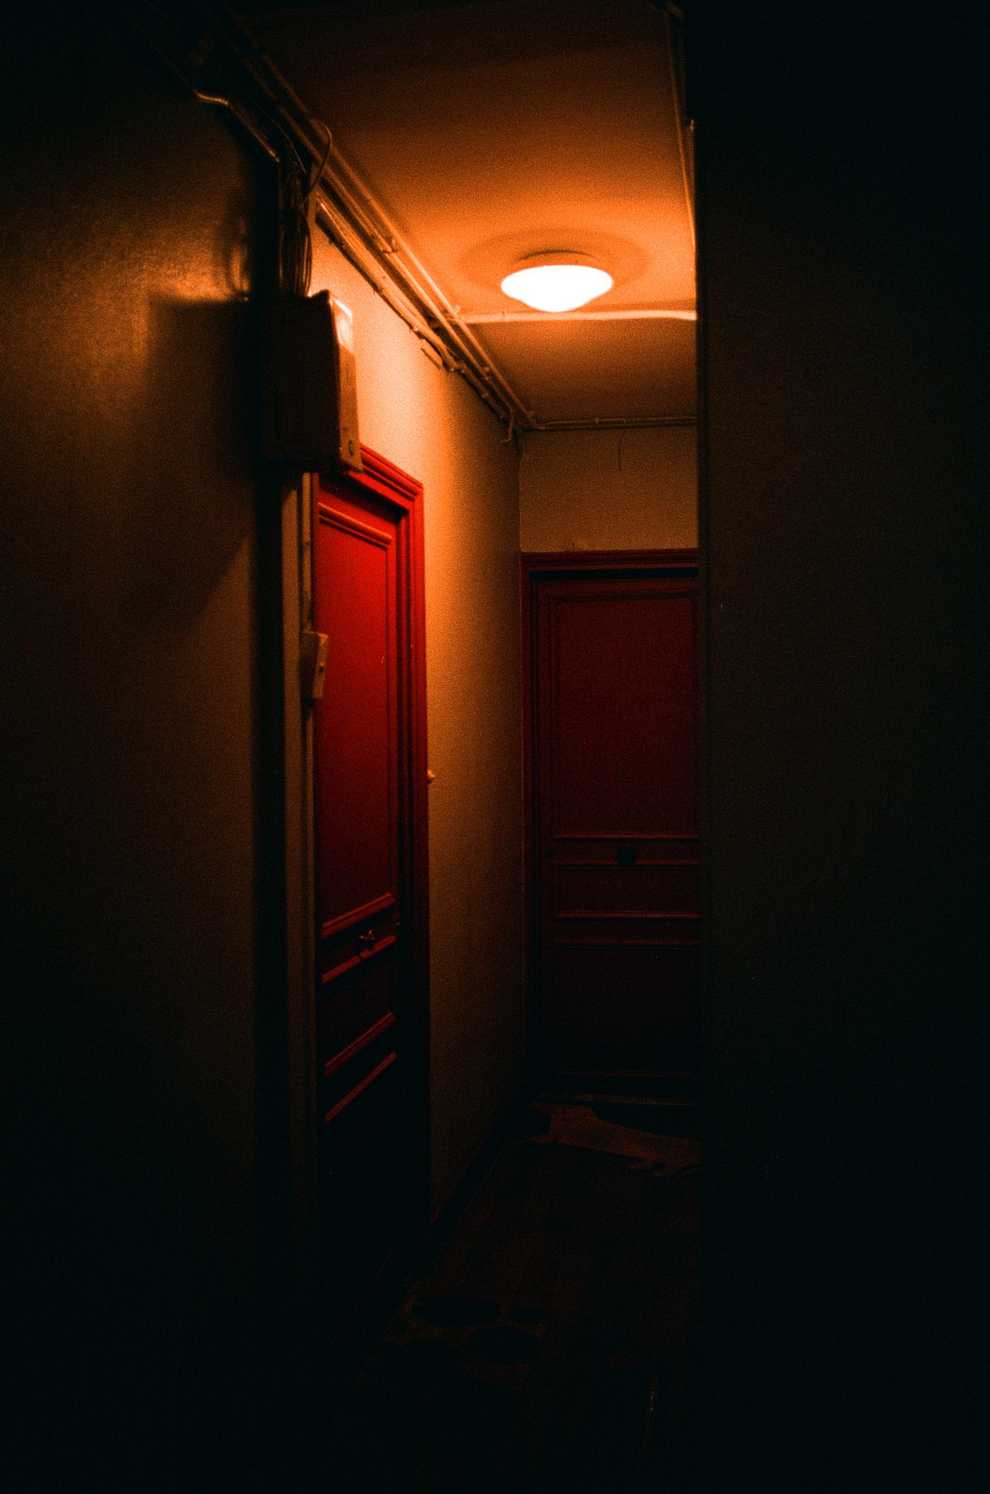 A darkened corridor with a single dome light highlighting two red doors and a box of cables